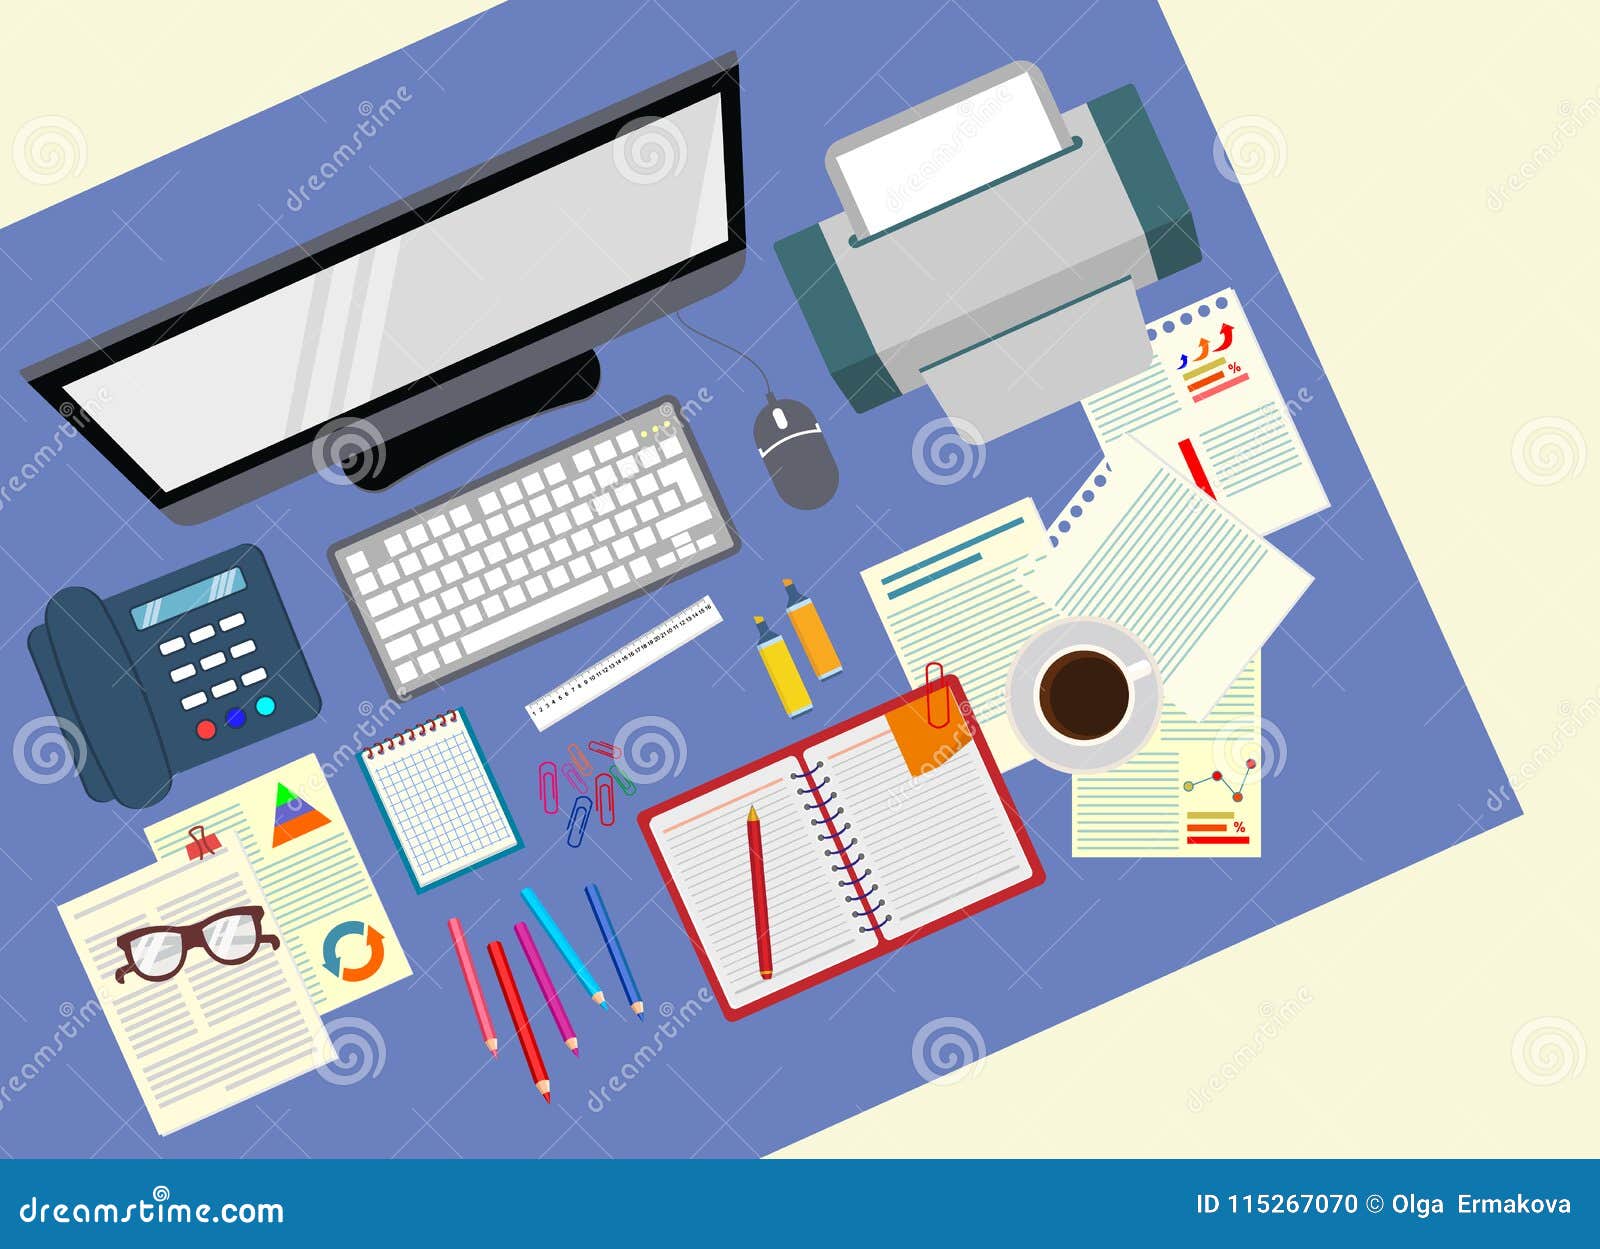 Desk Office Realistic Workplace Organization The View From The